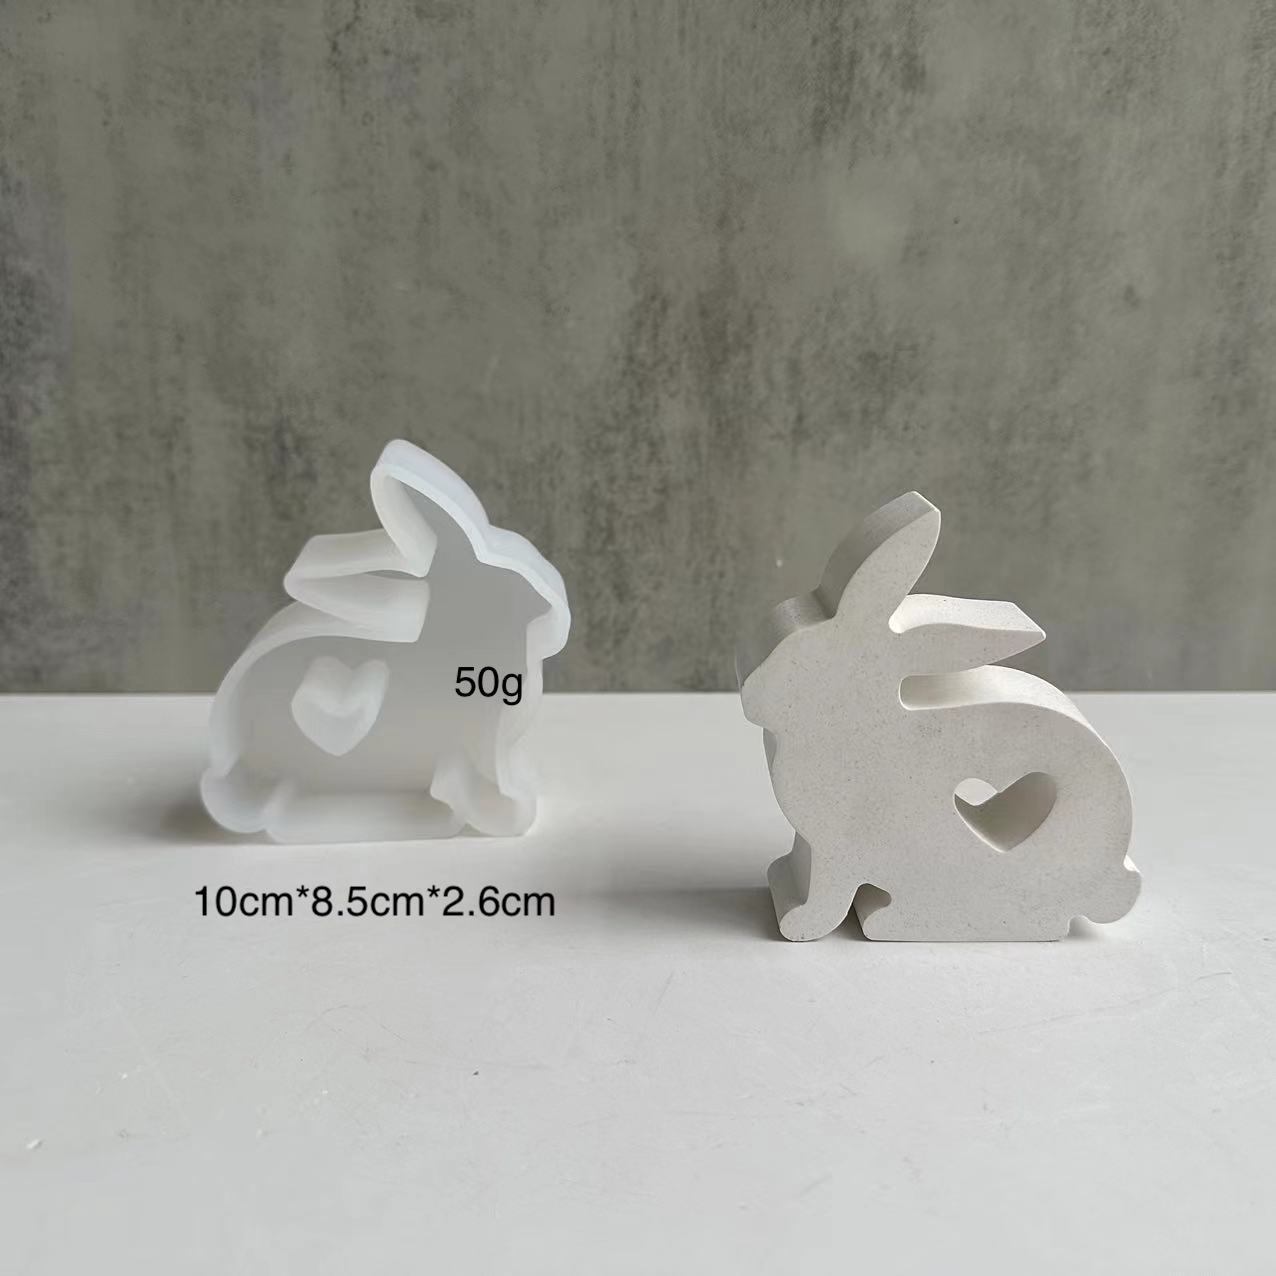 Lovely Heart-shaped Rabbit Ornament Resin Mold 【Upgraded Soft Material】